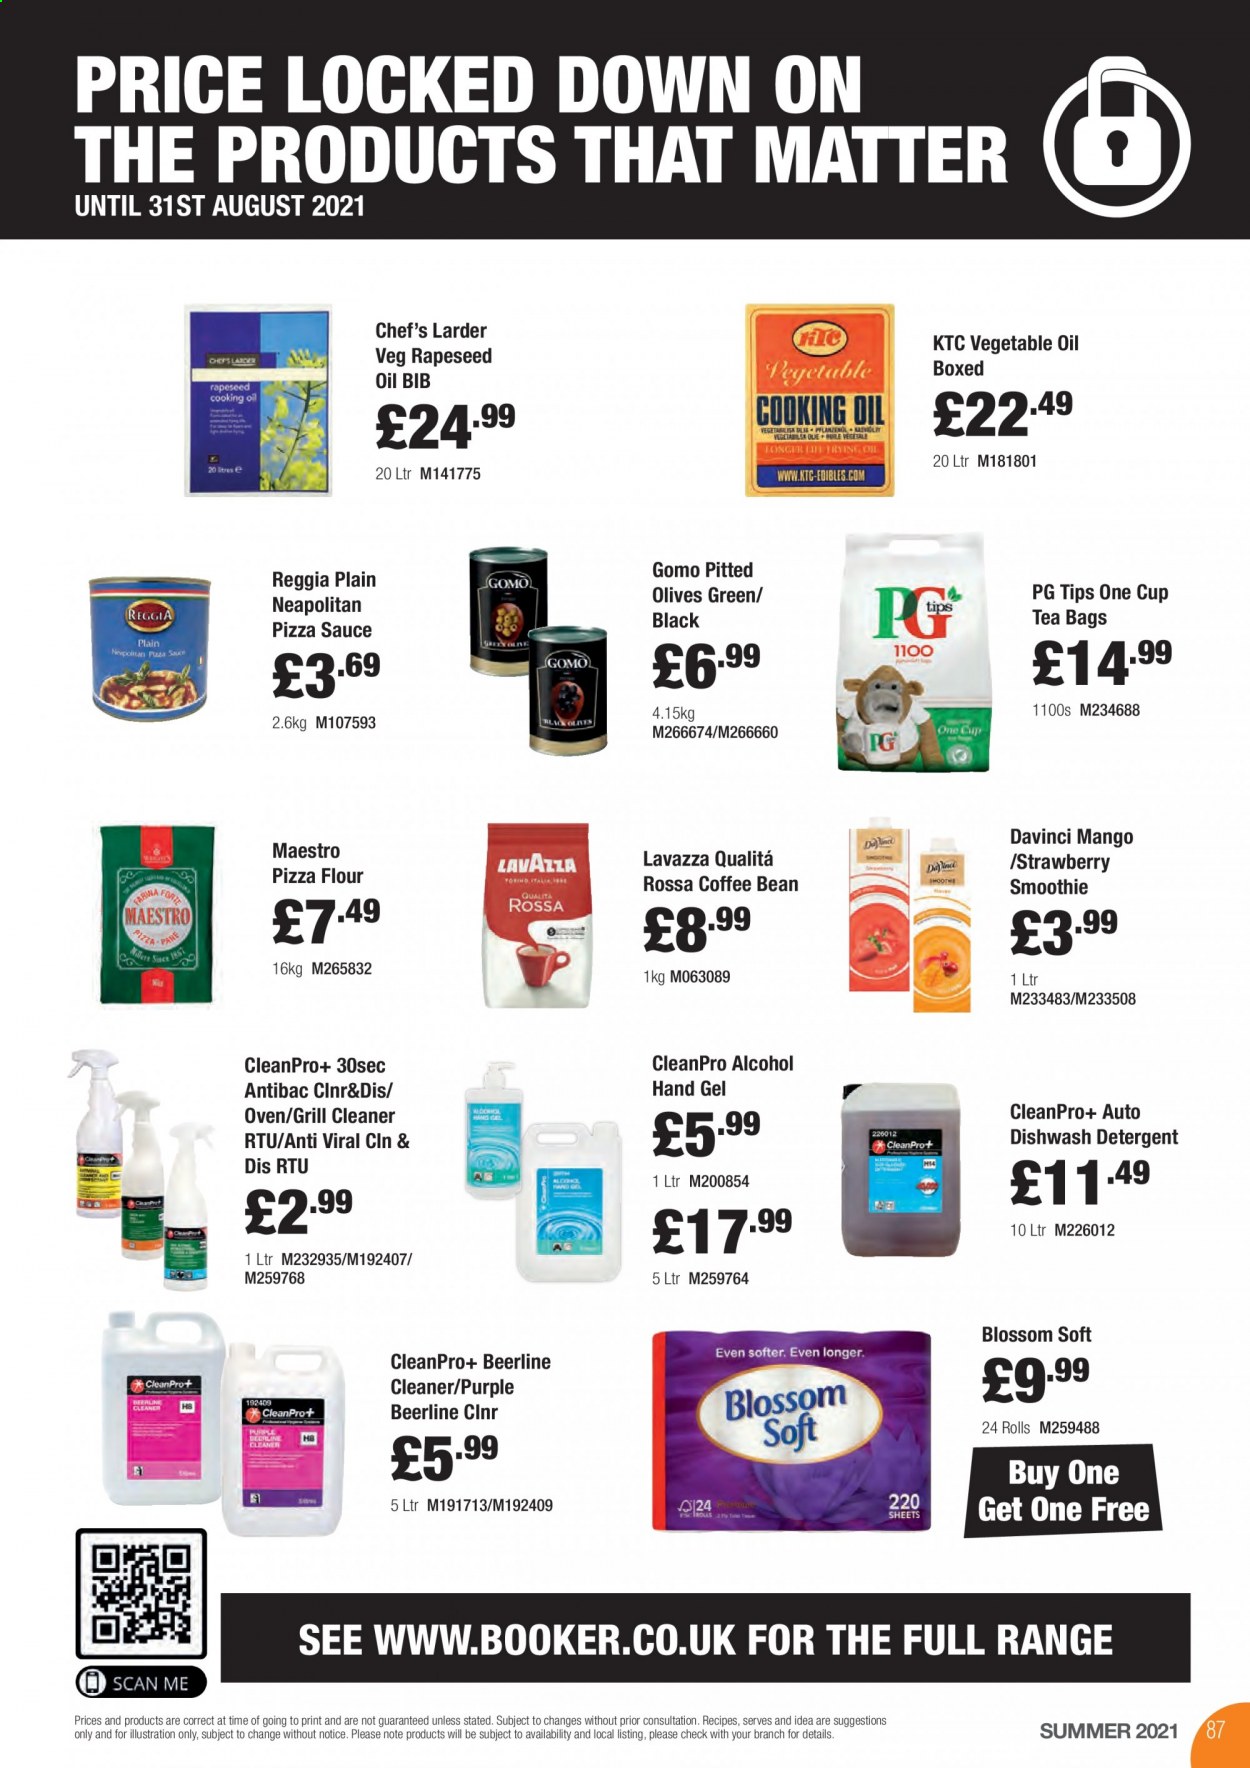 thumbnail - Makro offer  - 17/08/2021 - 31/08/2021 - Sales products - alcohol, mango, sauce, Blossom, flour, olives, vegetable oil, oil, smoothie, tea bags, Lavazza, coffee, detergent, cleaner, dishwashing liquid, hand gel, cup. Page 87.